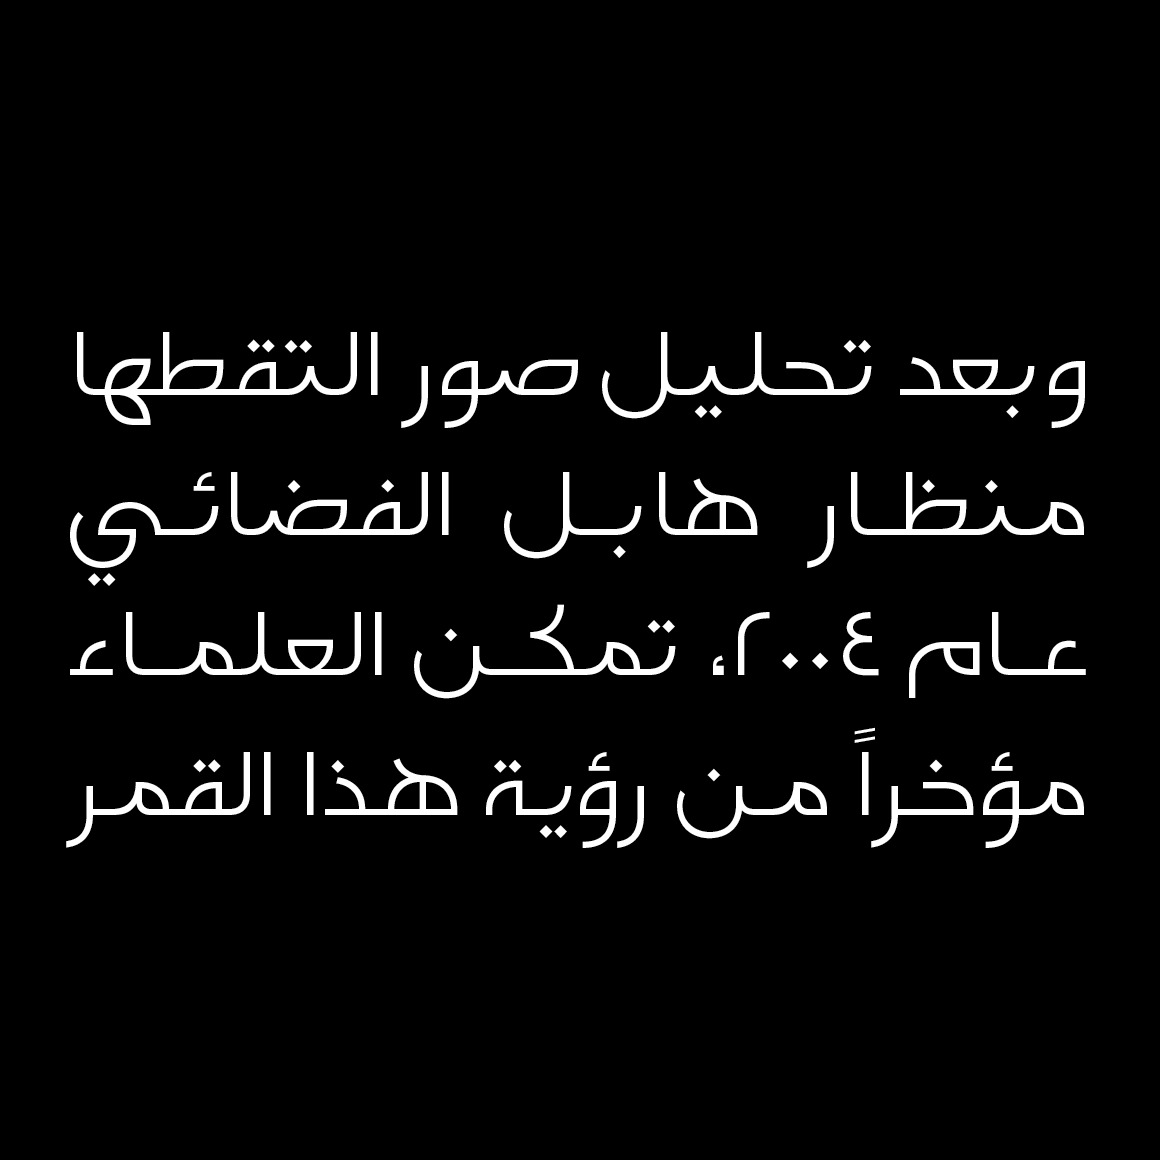 Falak - Arabic Font black preview with example phrase.